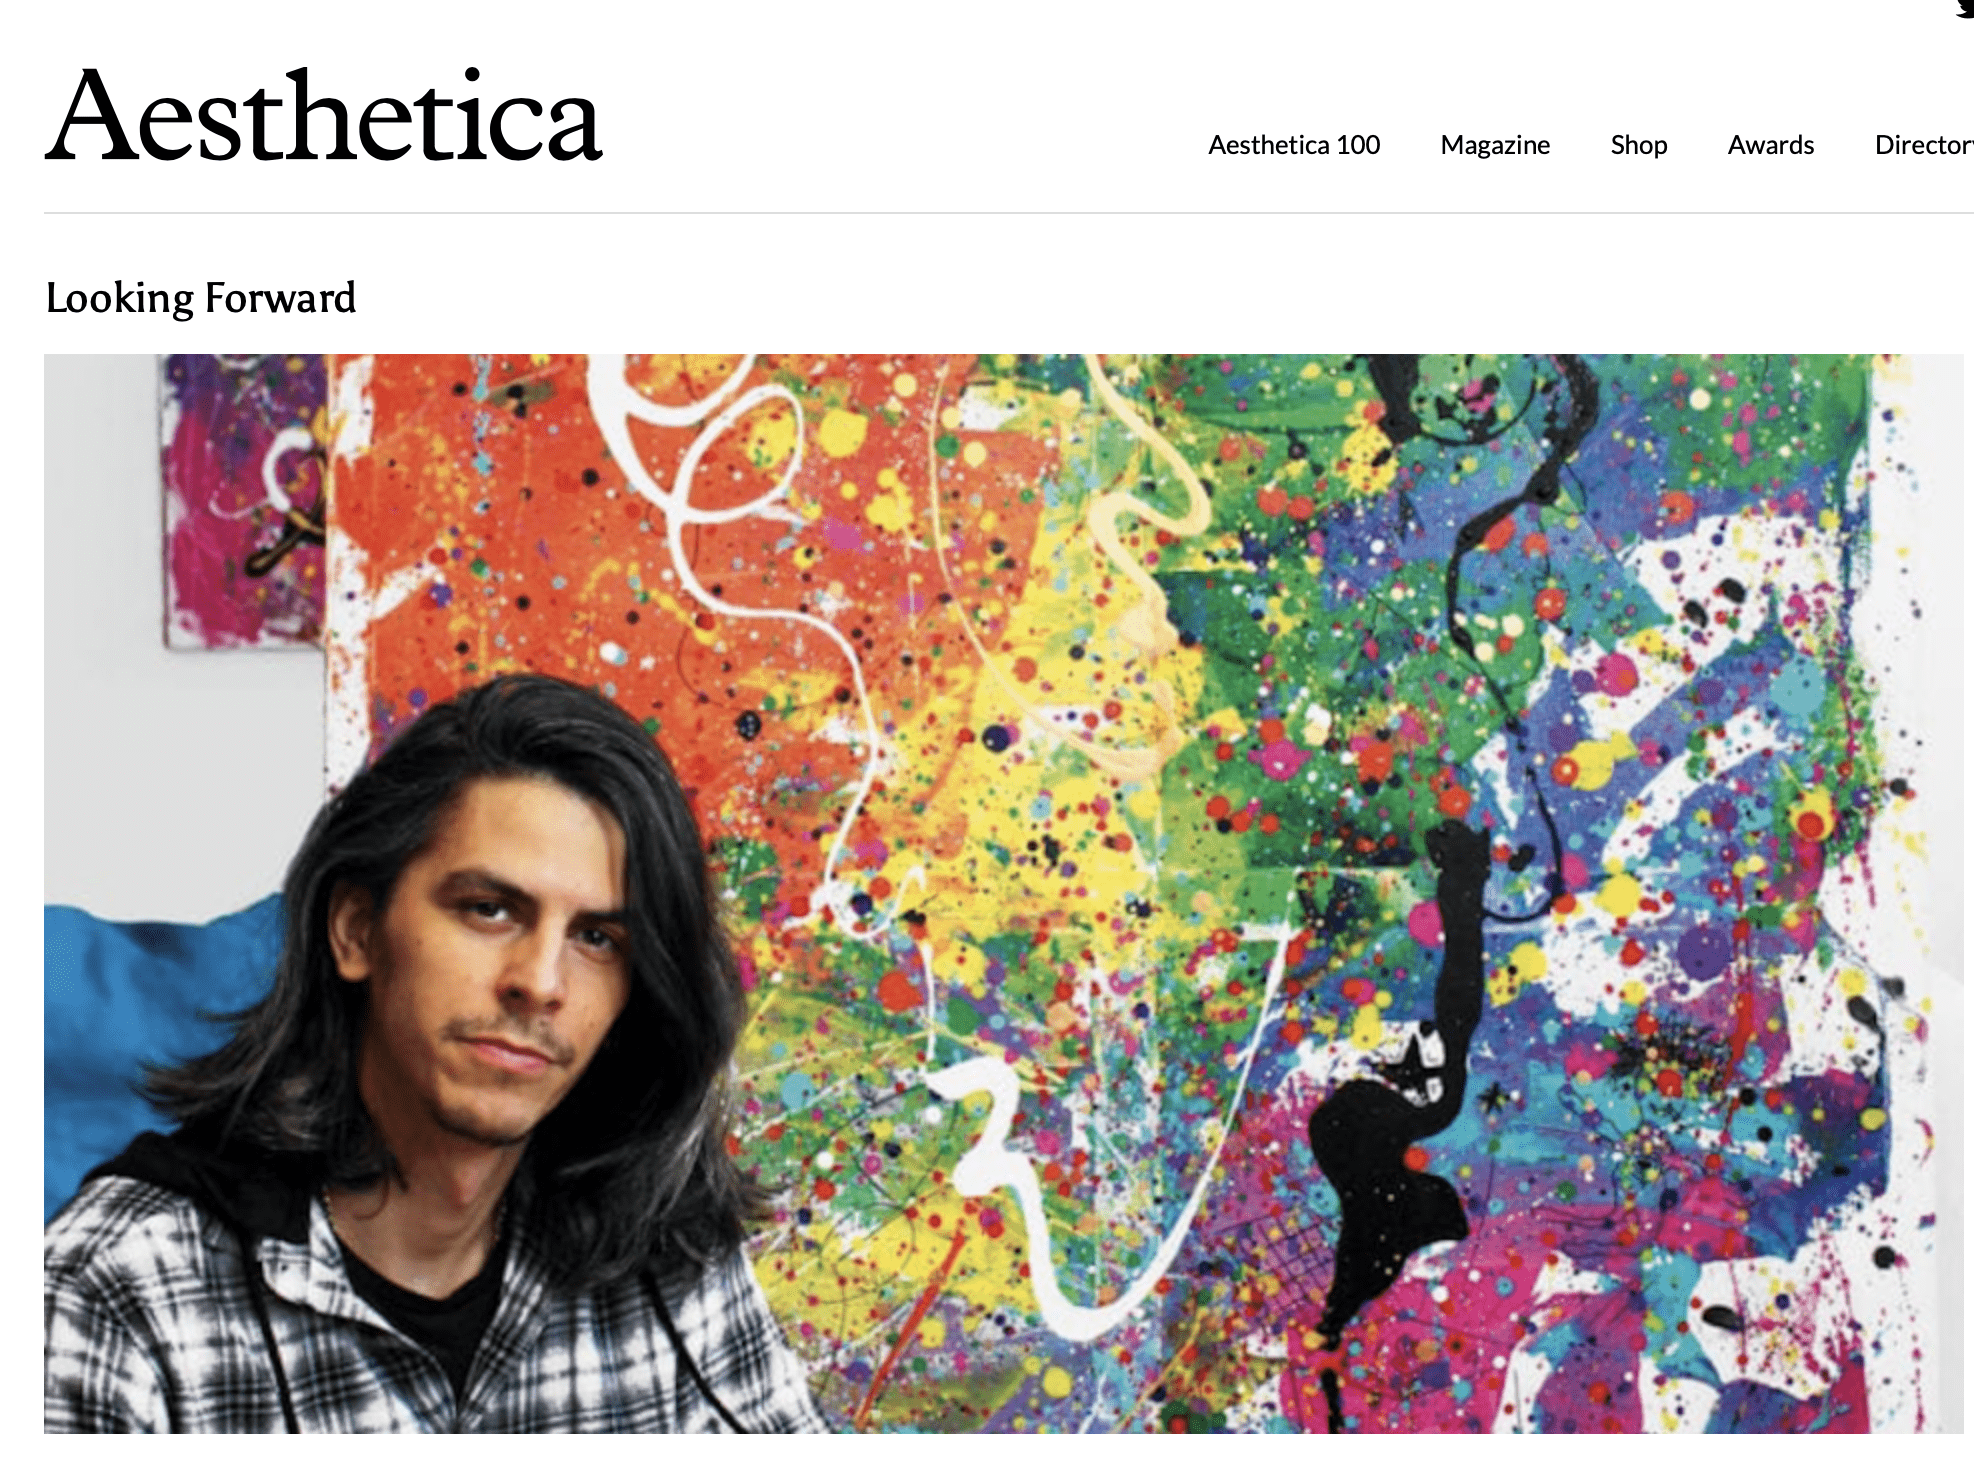 Interviewed by Aesthetica Magazine